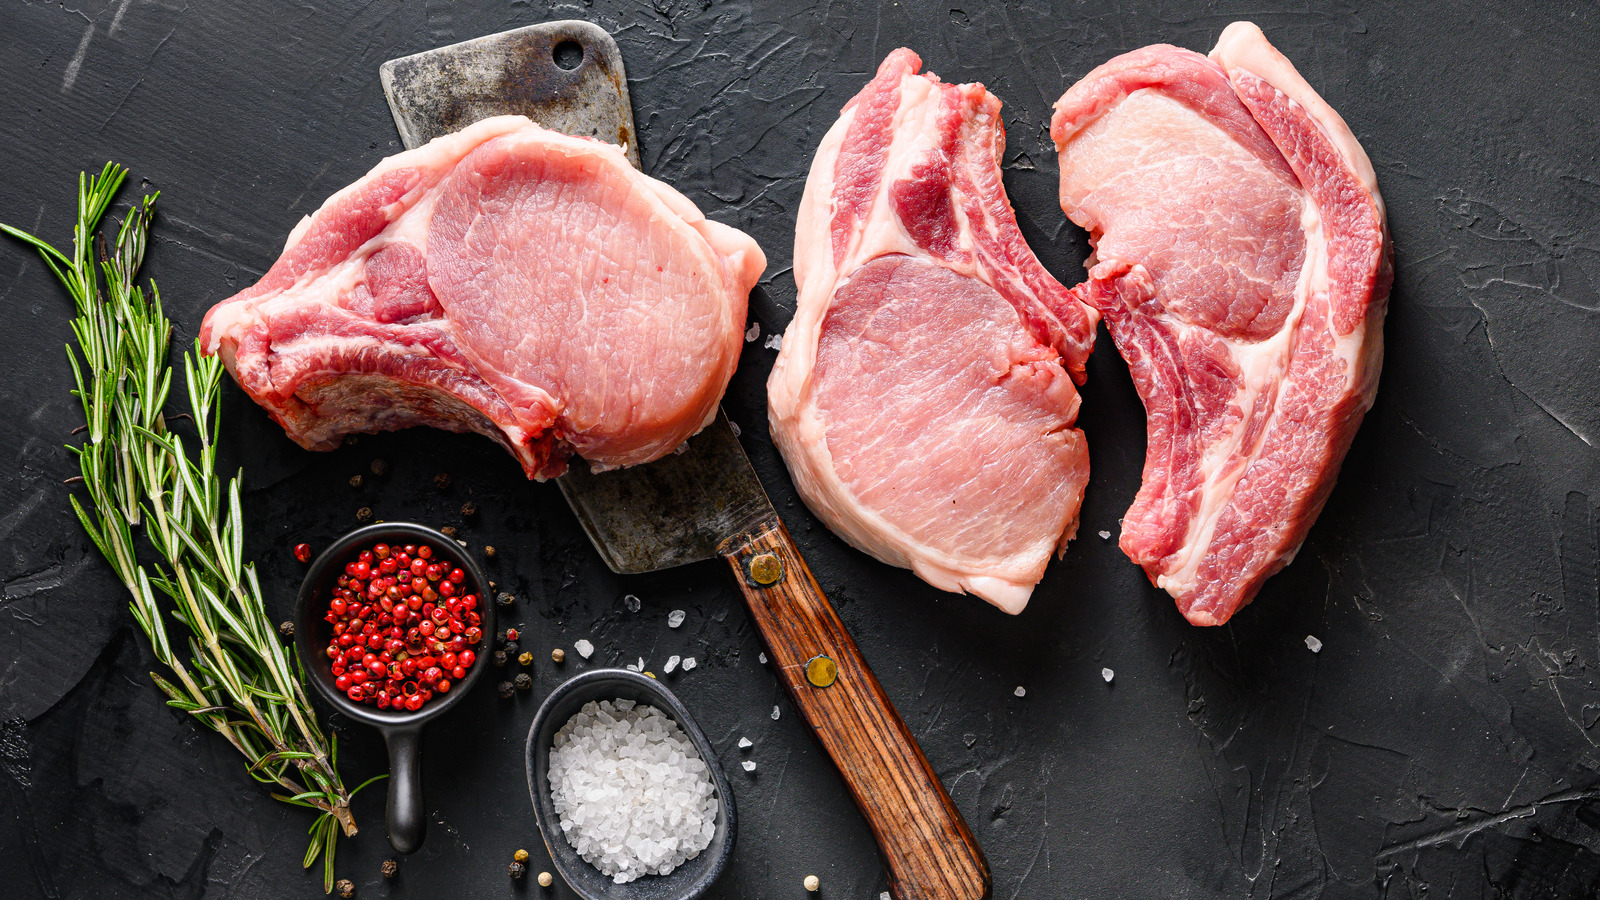 Why You Need To Trim The Fat From Pork Chops When Grilling 